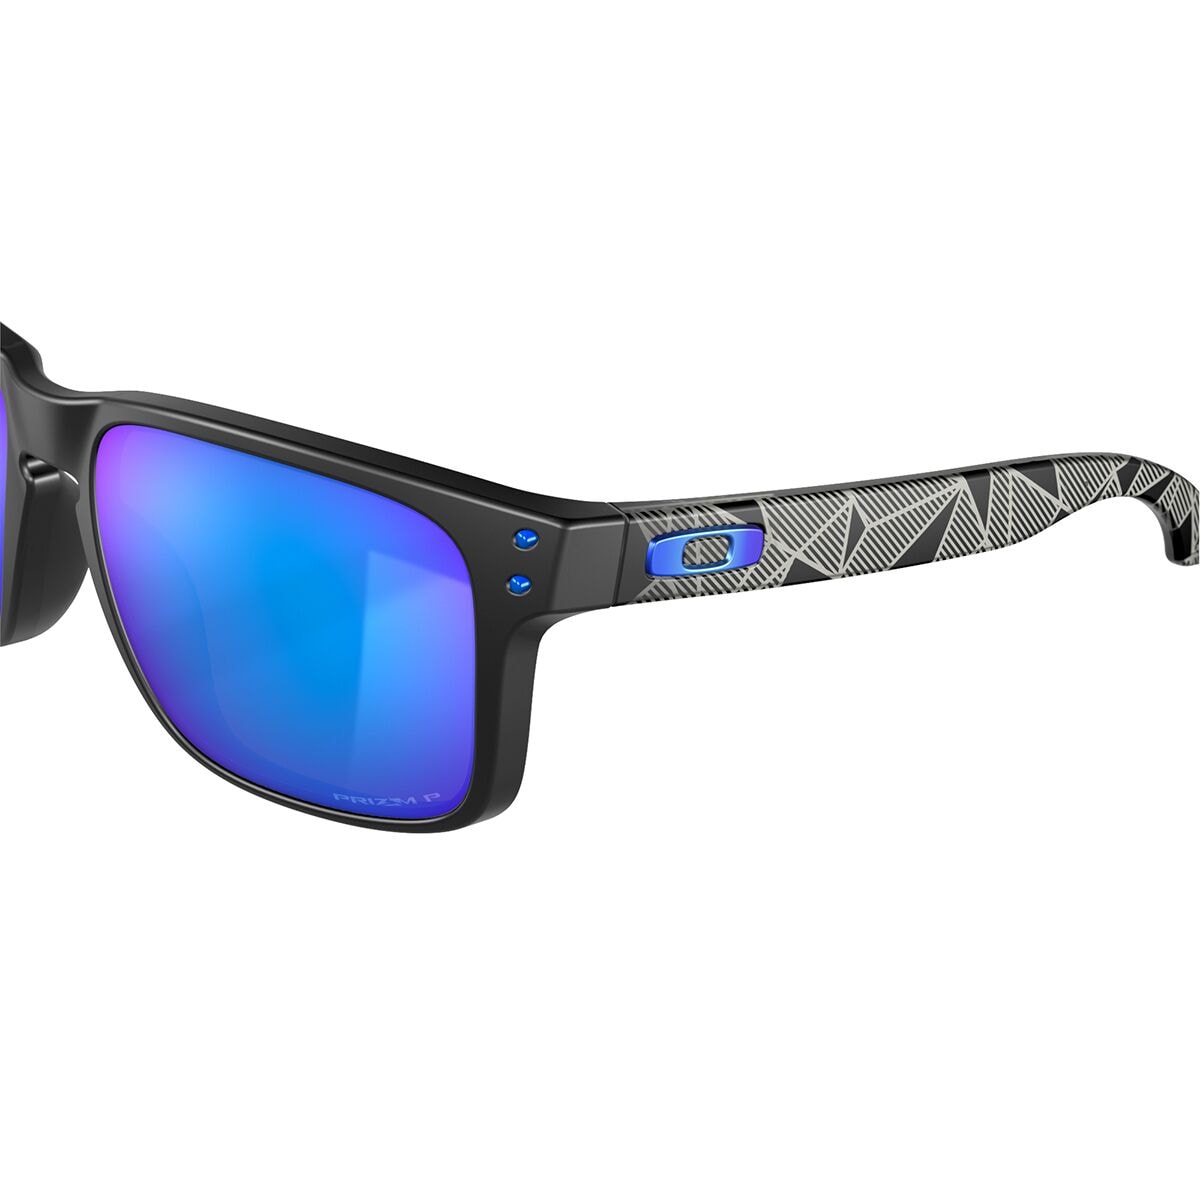  Oakley Holbrook Sunglasses (Matte Black Prizmatic Frame, Prizm  Sapphire Polarized Lens) with Country Flag Microbag, Casual : Clothing,  Shoes & Jewelry